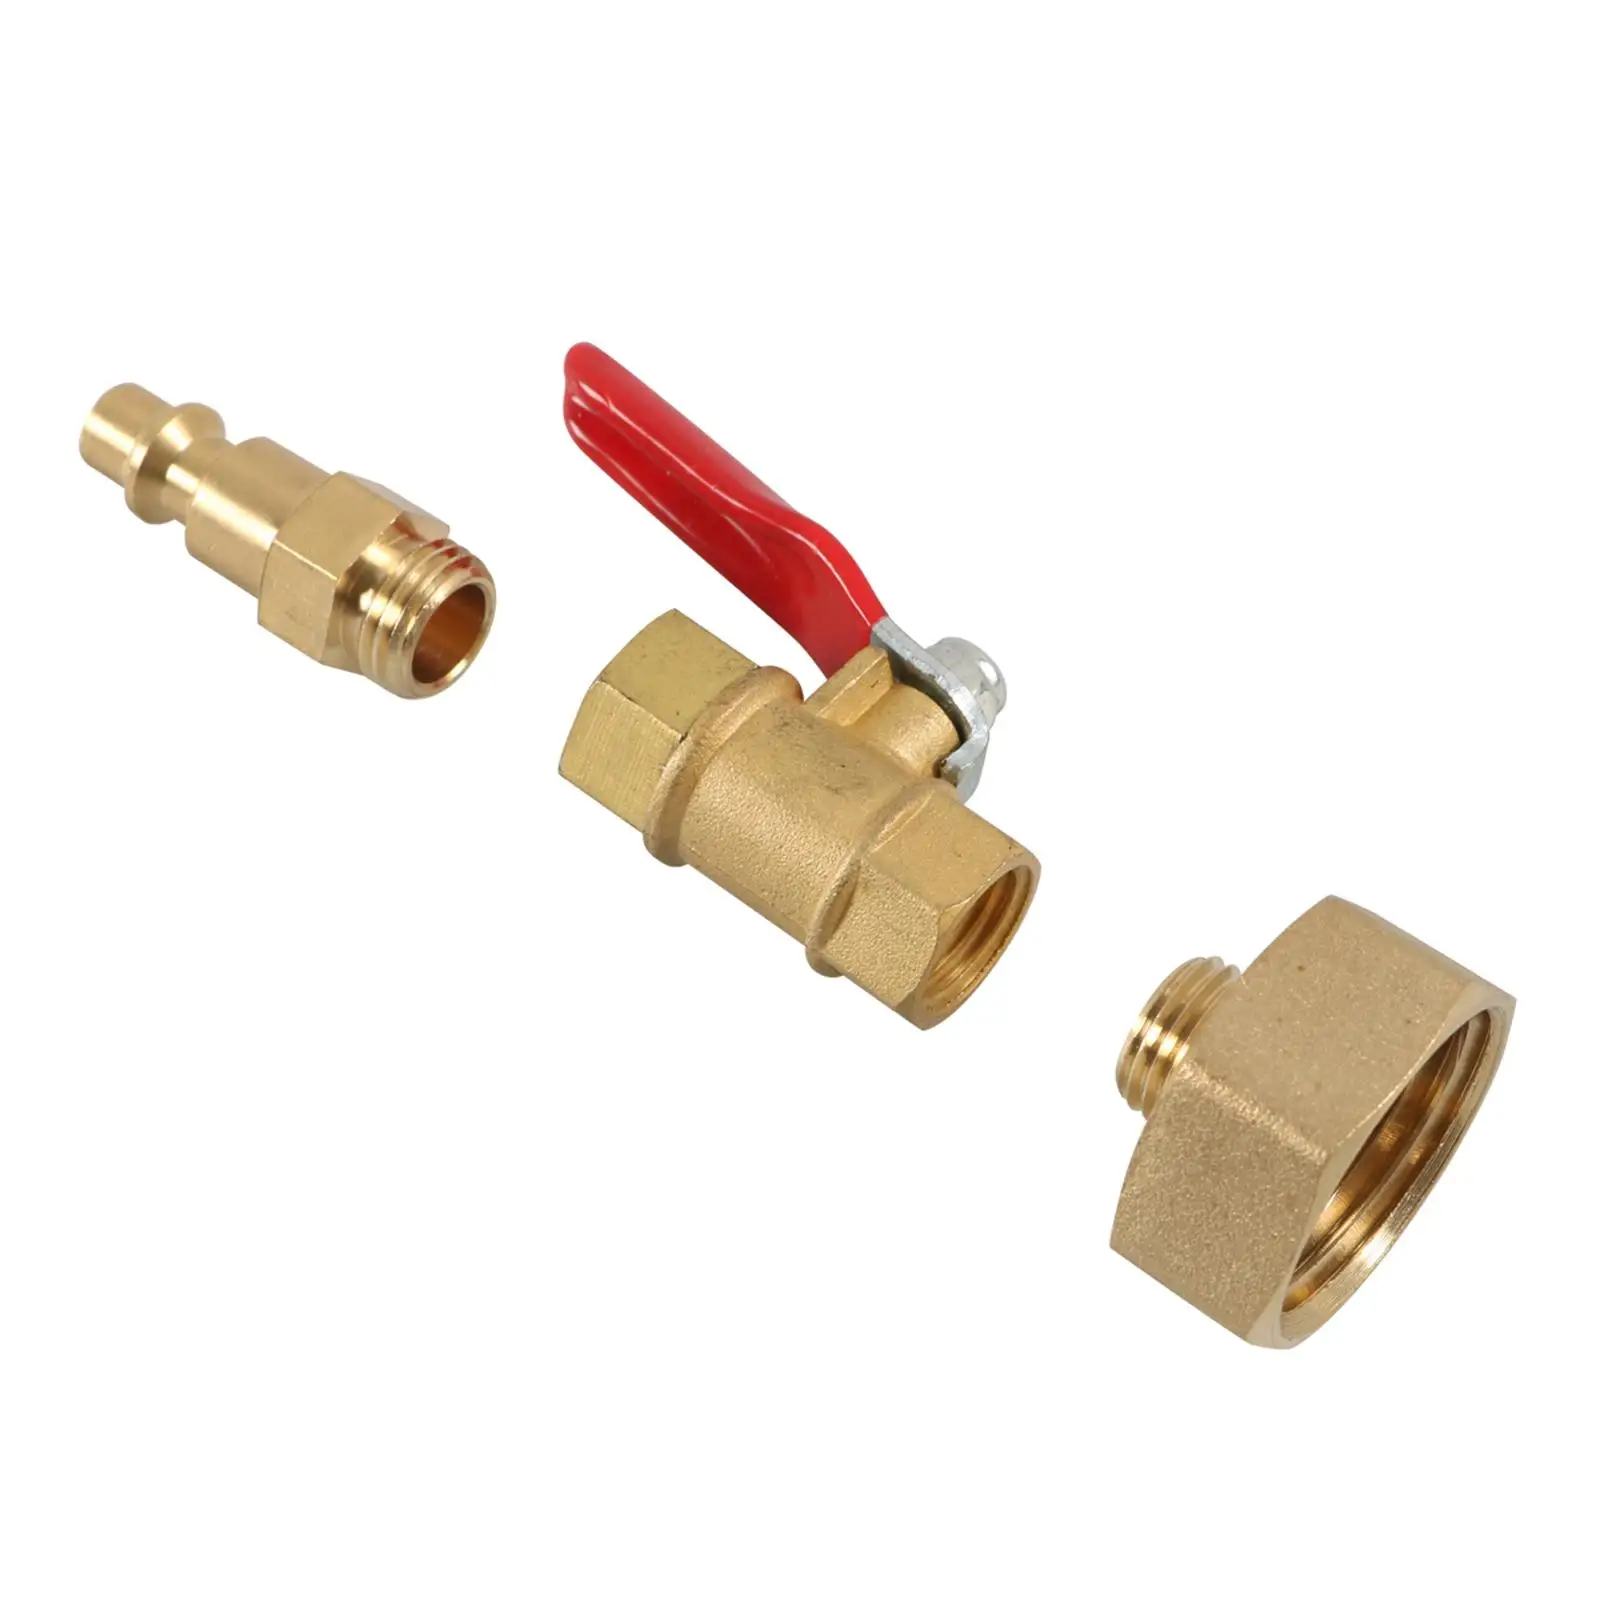 Brass Winterize Adapter with Ball Valve Fit for RV Boat Travel Trailer